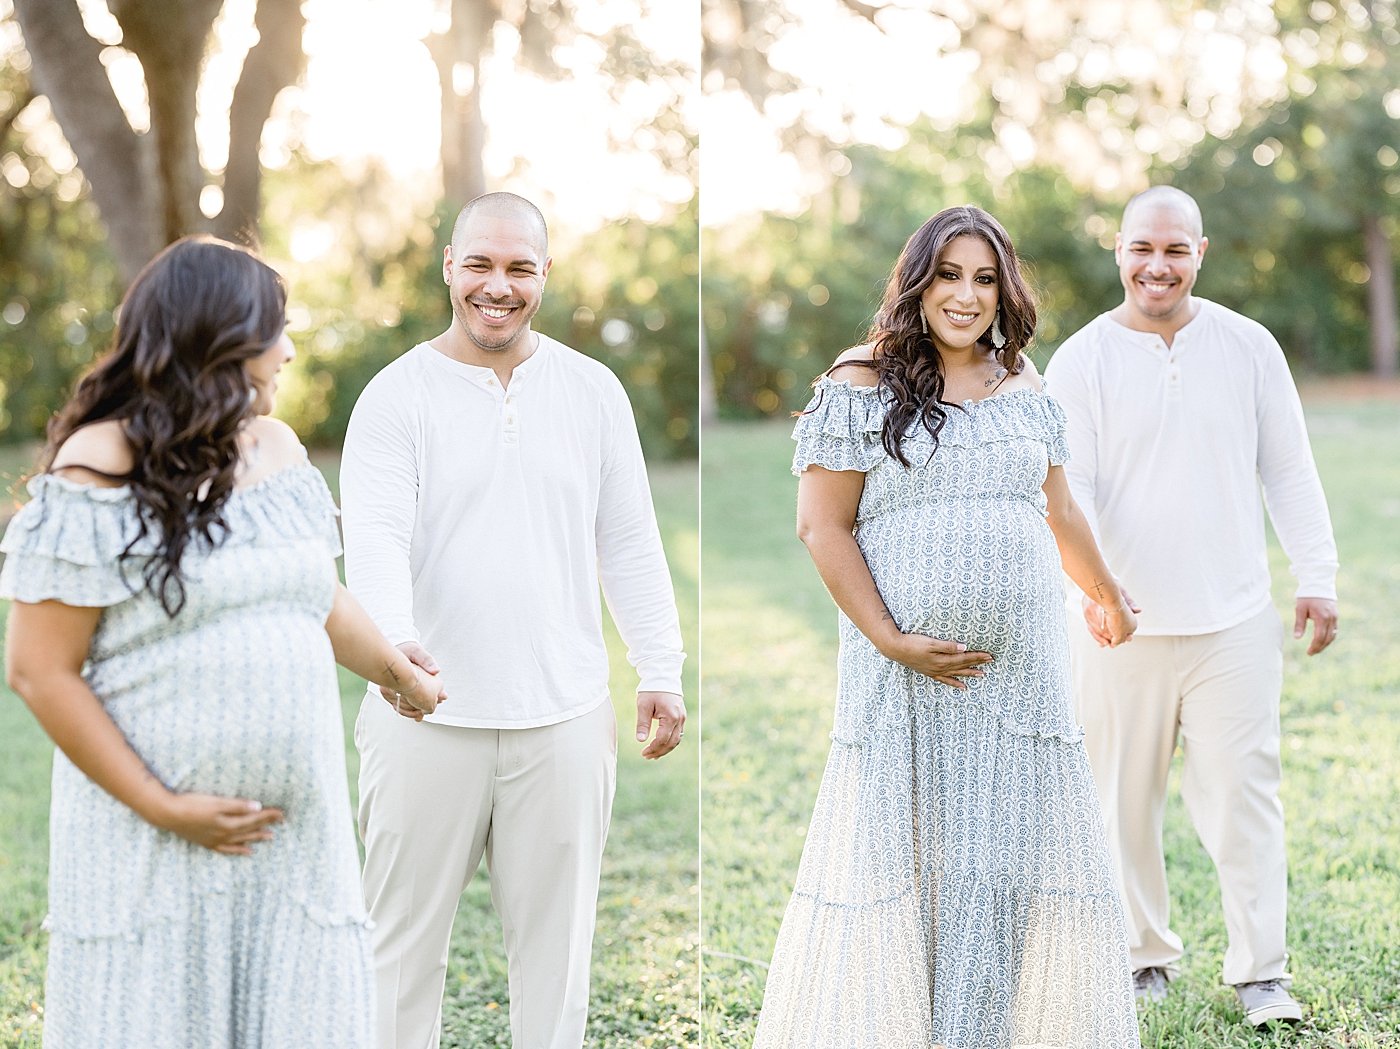 Couple walking together during maternity photoshoot. Photo by Brittany Elise Photography.